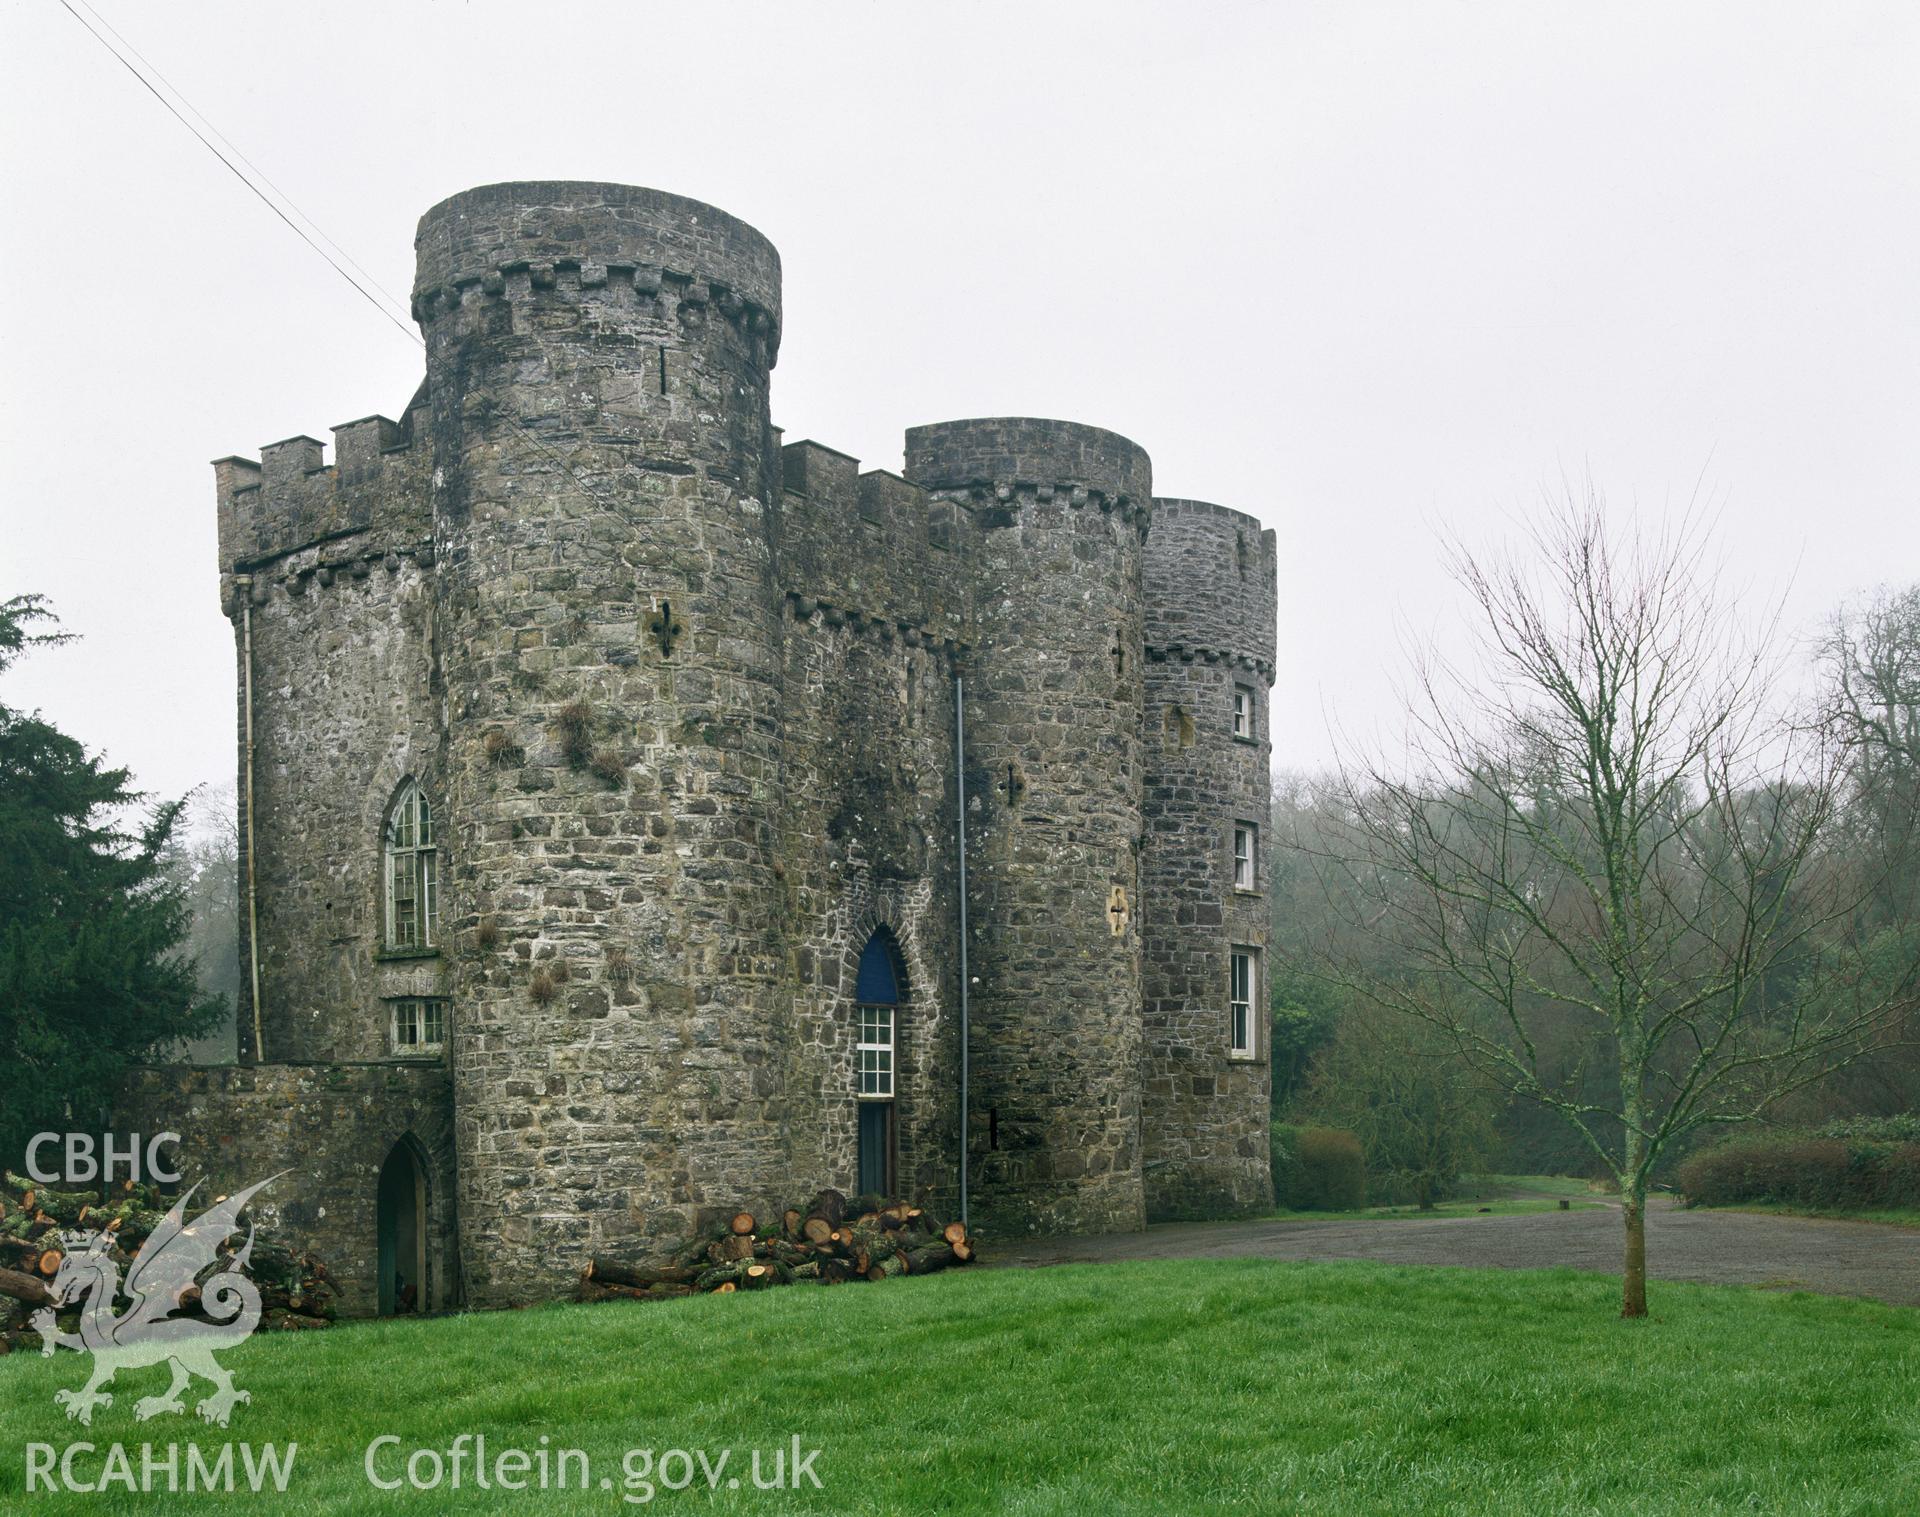 RCAHMW colour transparency showing Upton Castle, taken by Iain Wright, 2003.